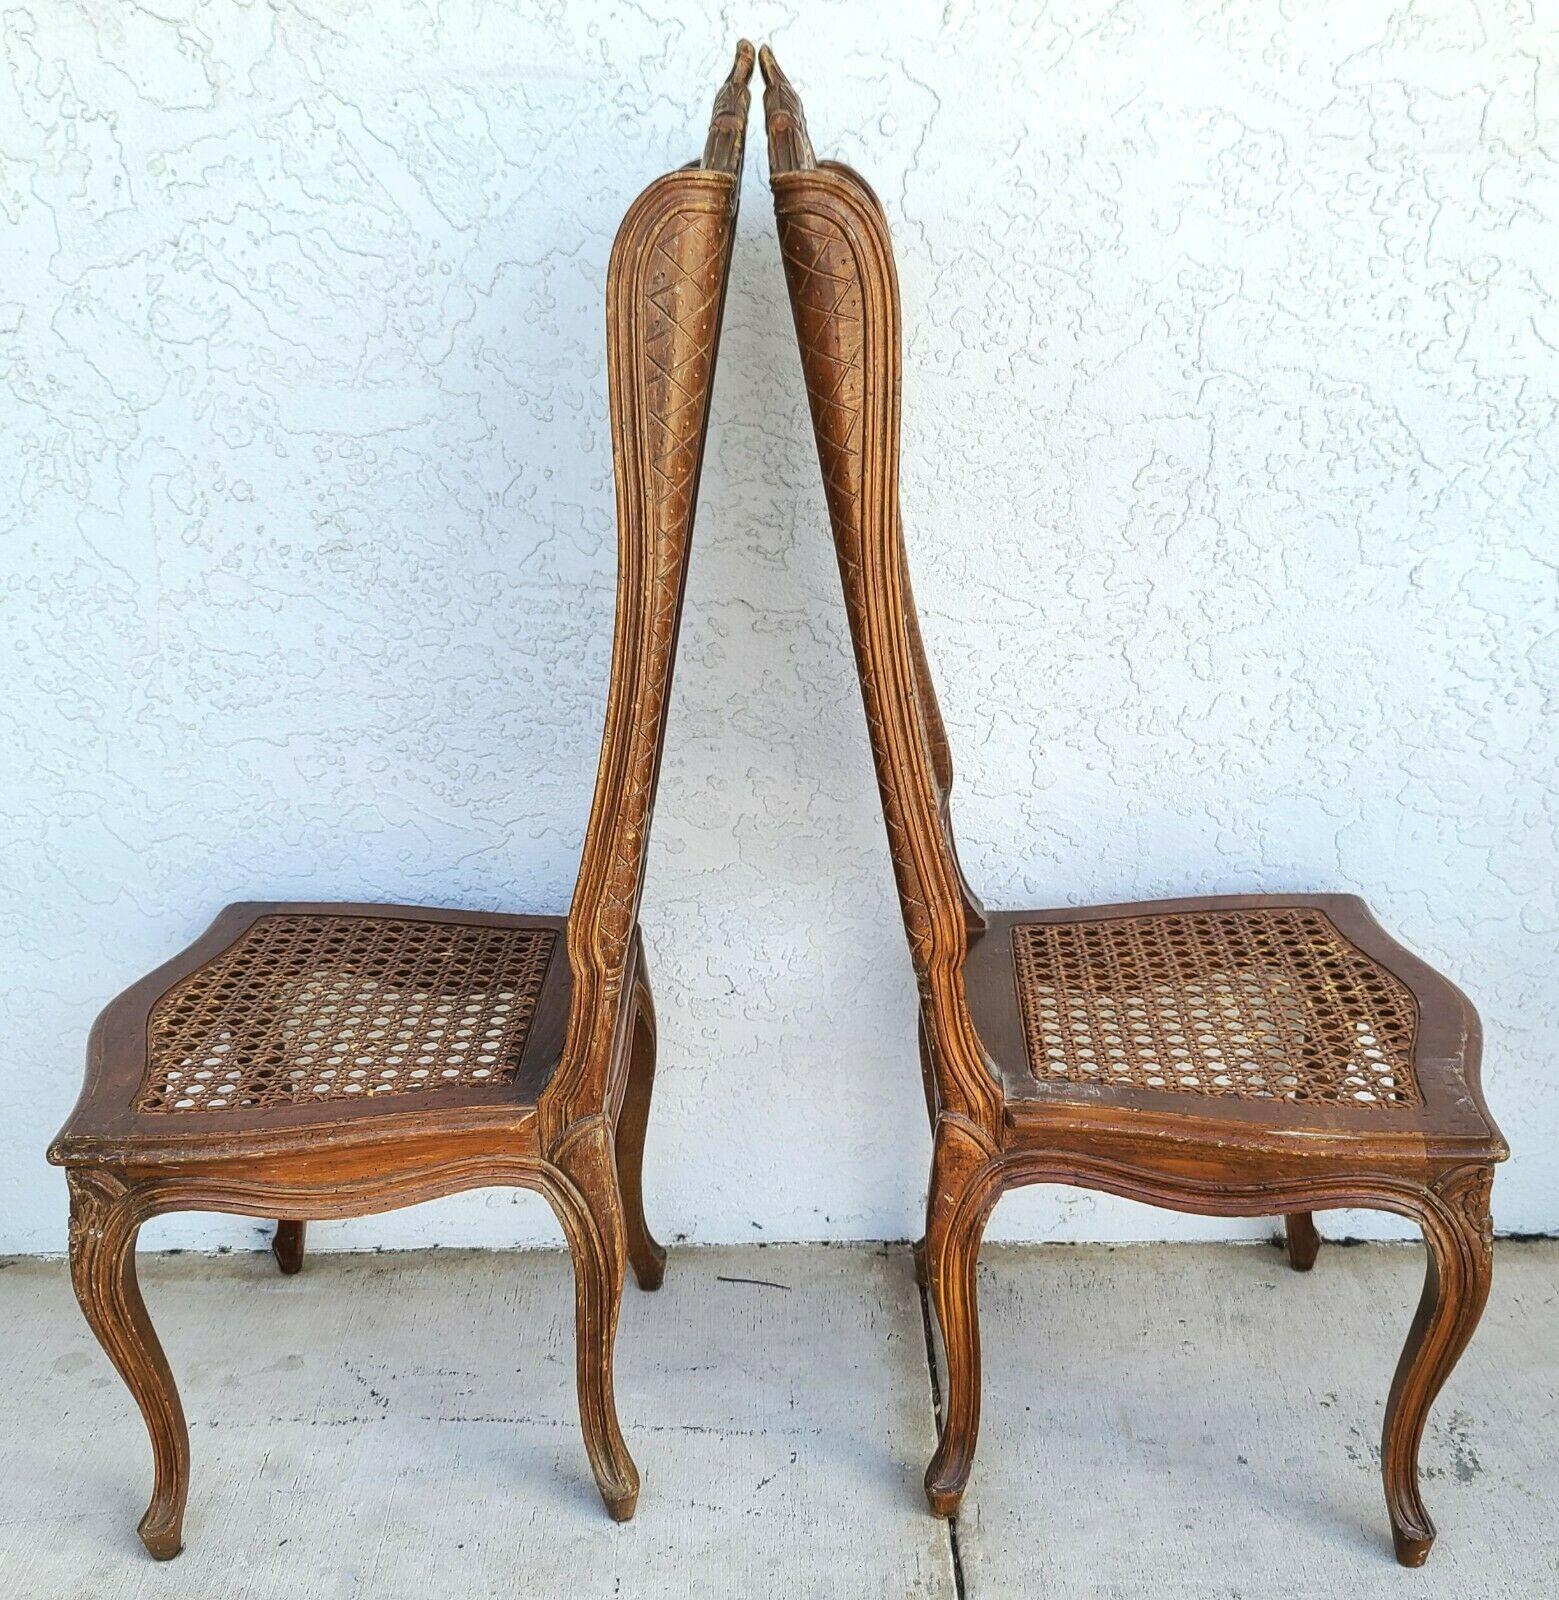 Offering One of our recent palm beach estate fine furniture acquisitions of a set of (6) mid century French wingback cane dining chairs by Mariano Garcia of Spain

Approximate Measurements in Inches
47